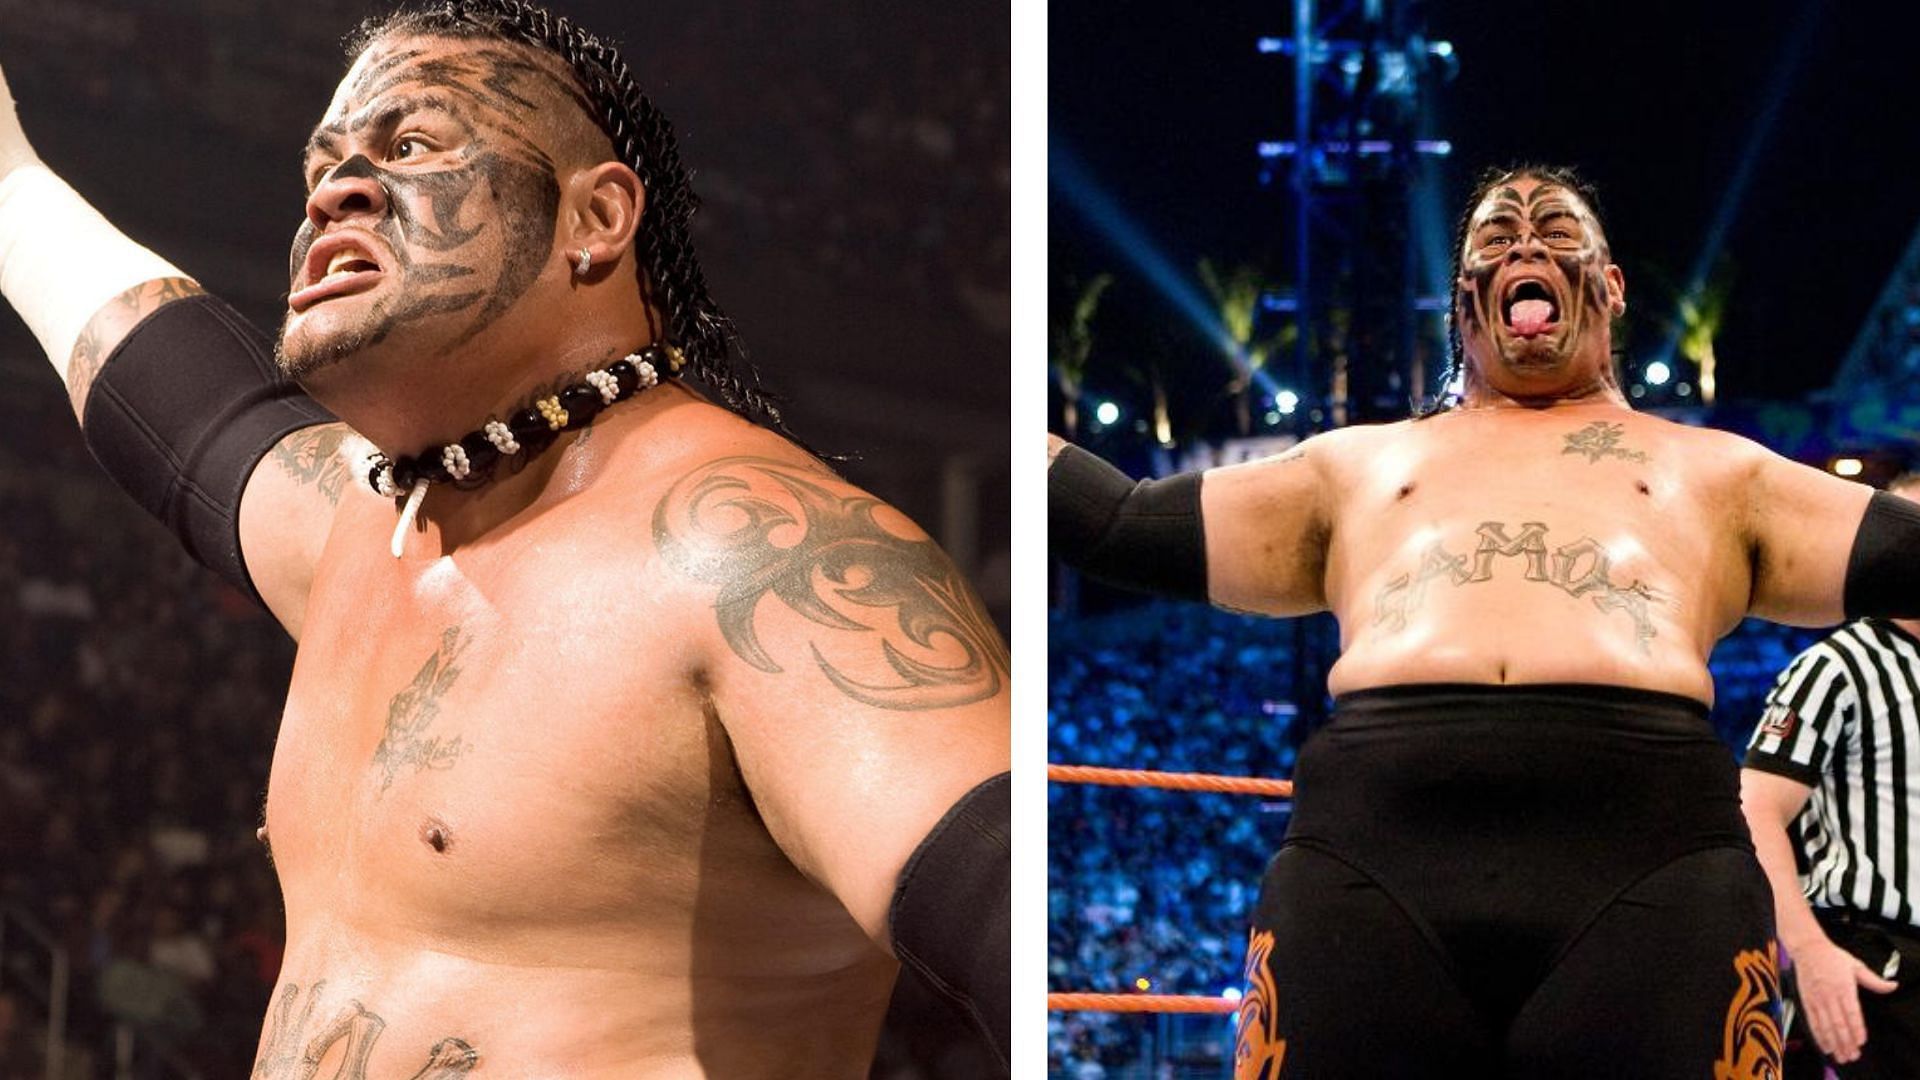 Umaga is one of the most feared WWE stars in history even after his death